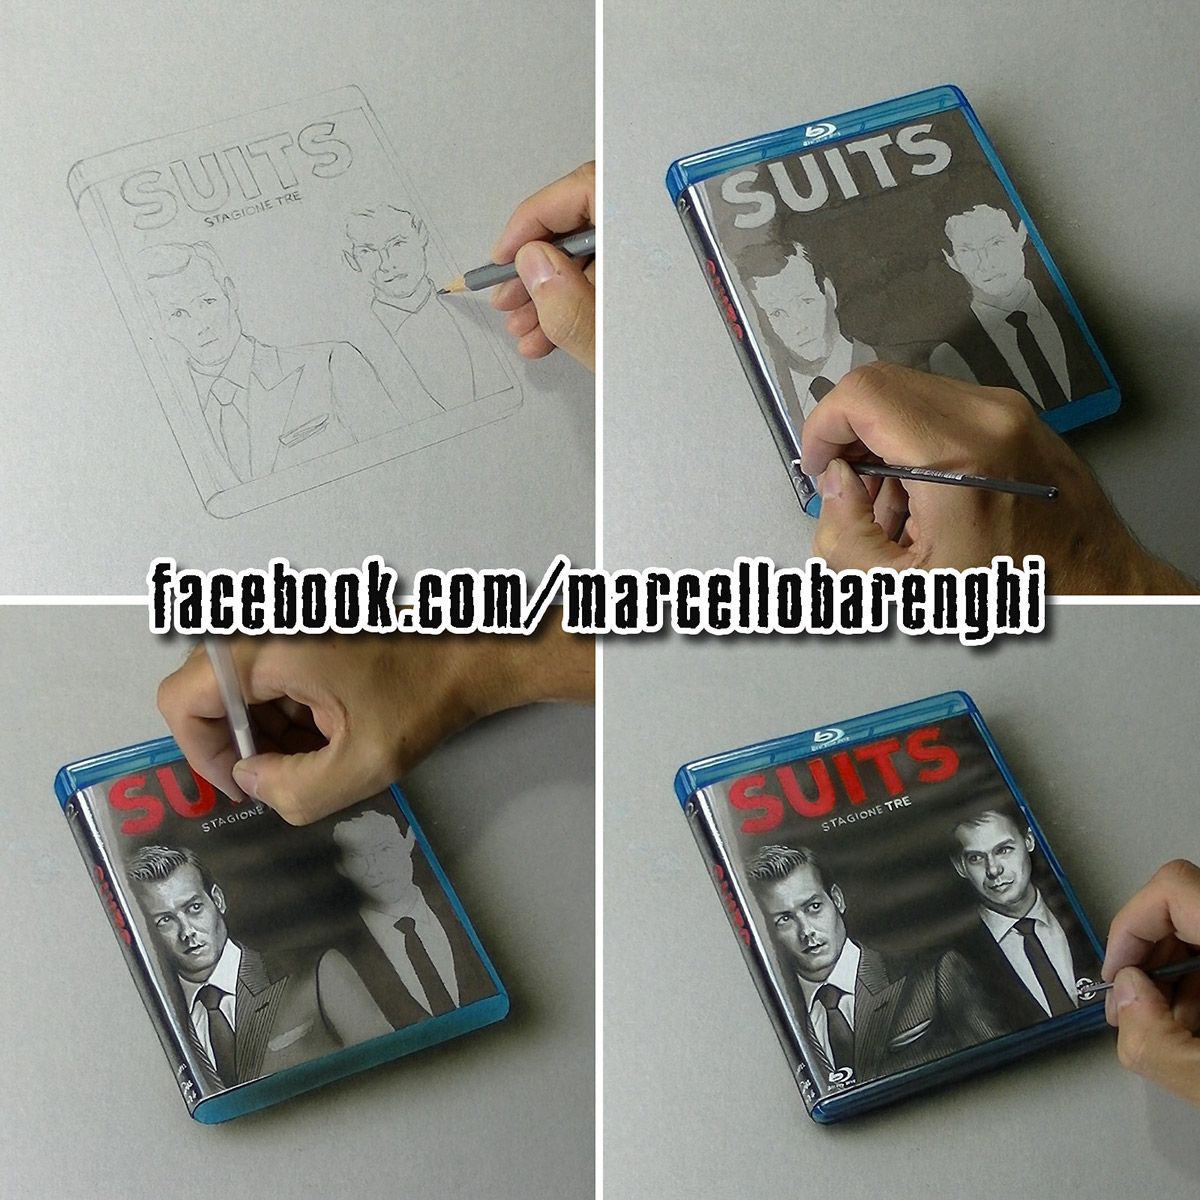 suits universal Amazon marcello barenghi hyperrealism drawing video